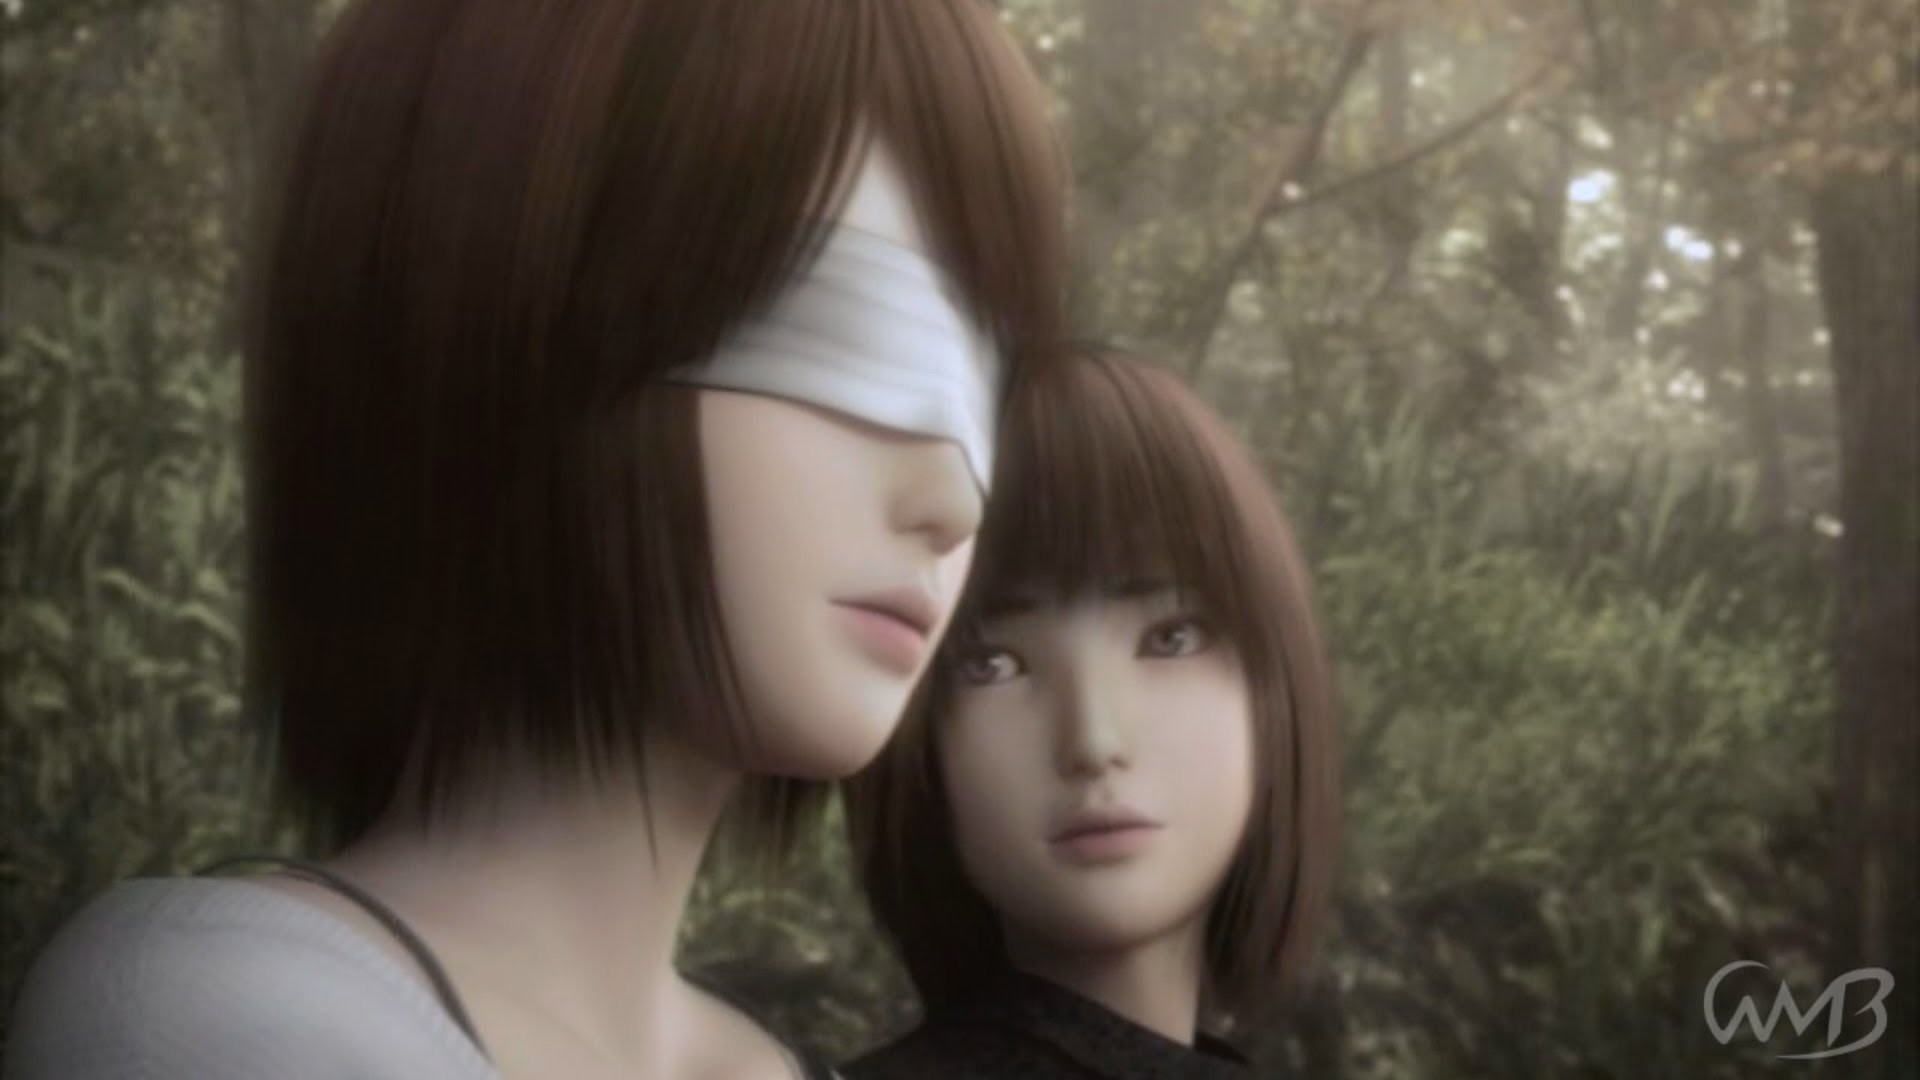 1920x1080 Fatal Frame 2 / Project Zero 2 Wii Edition - The Abyss Ending - YouTube